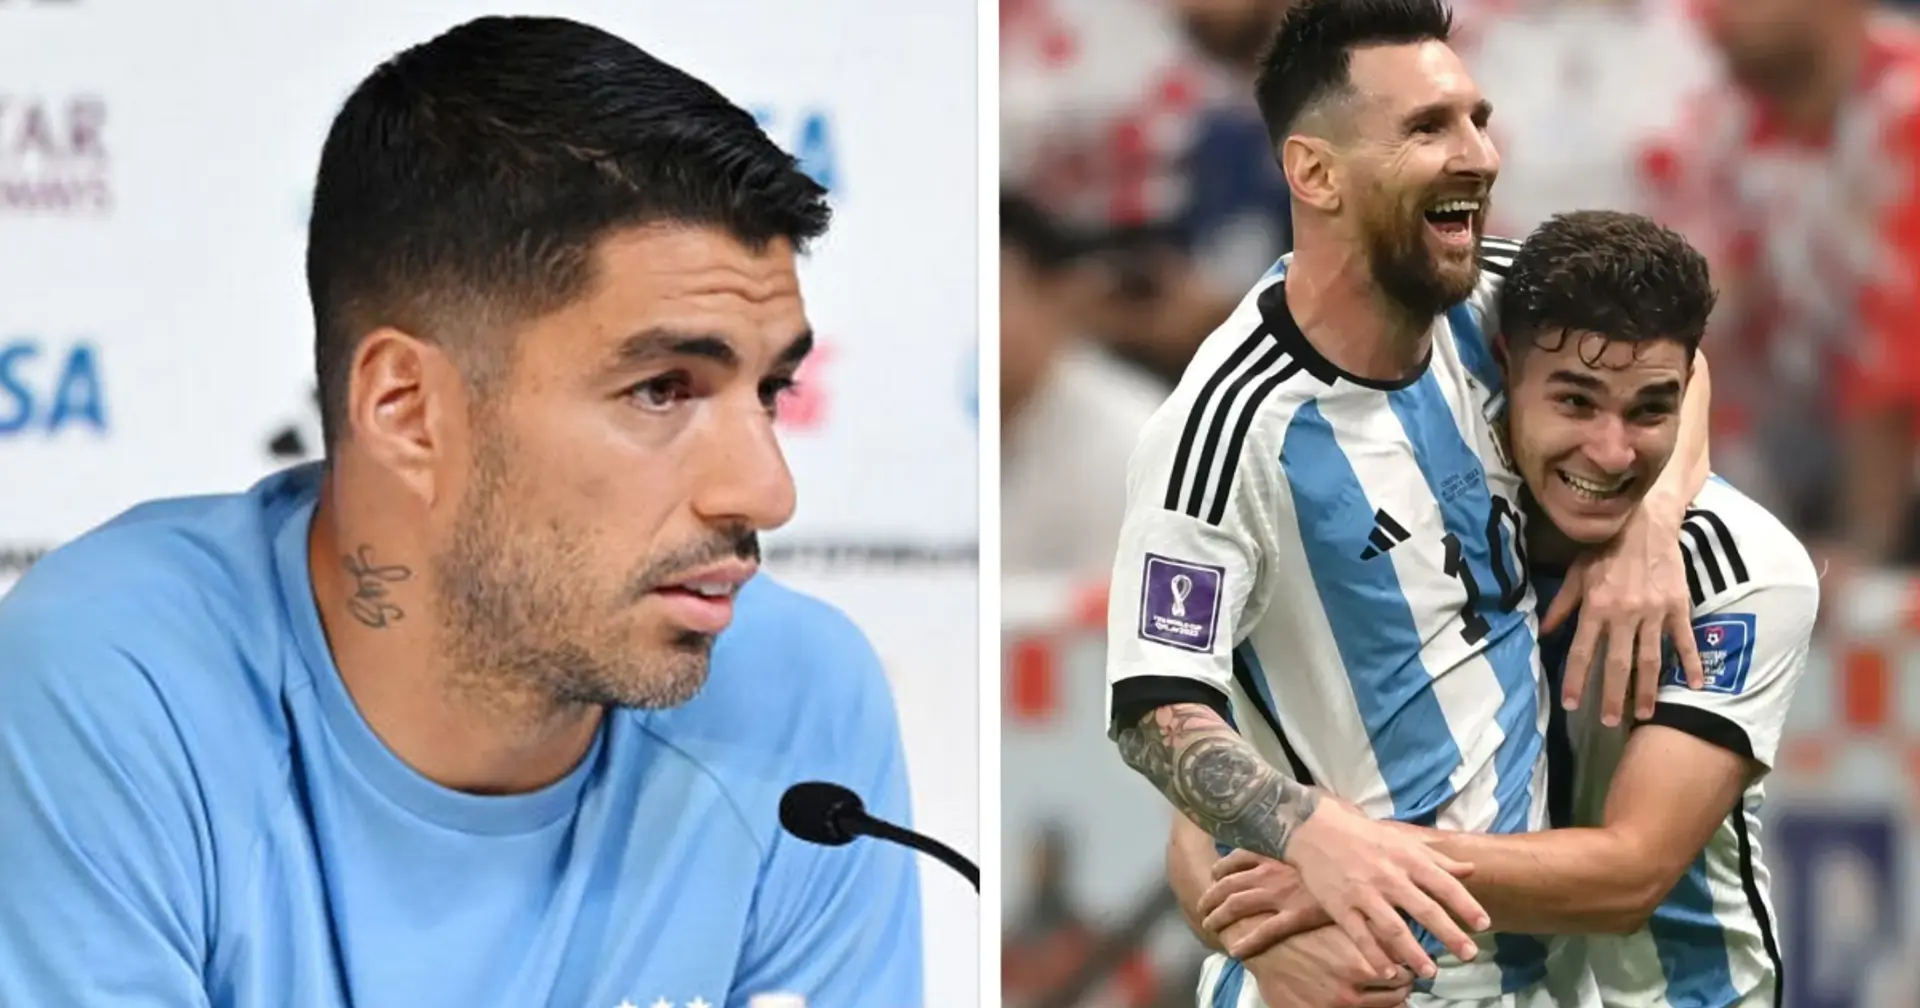 Luis Suarez sends message to Messi after Argentina win in World Cup semi-final